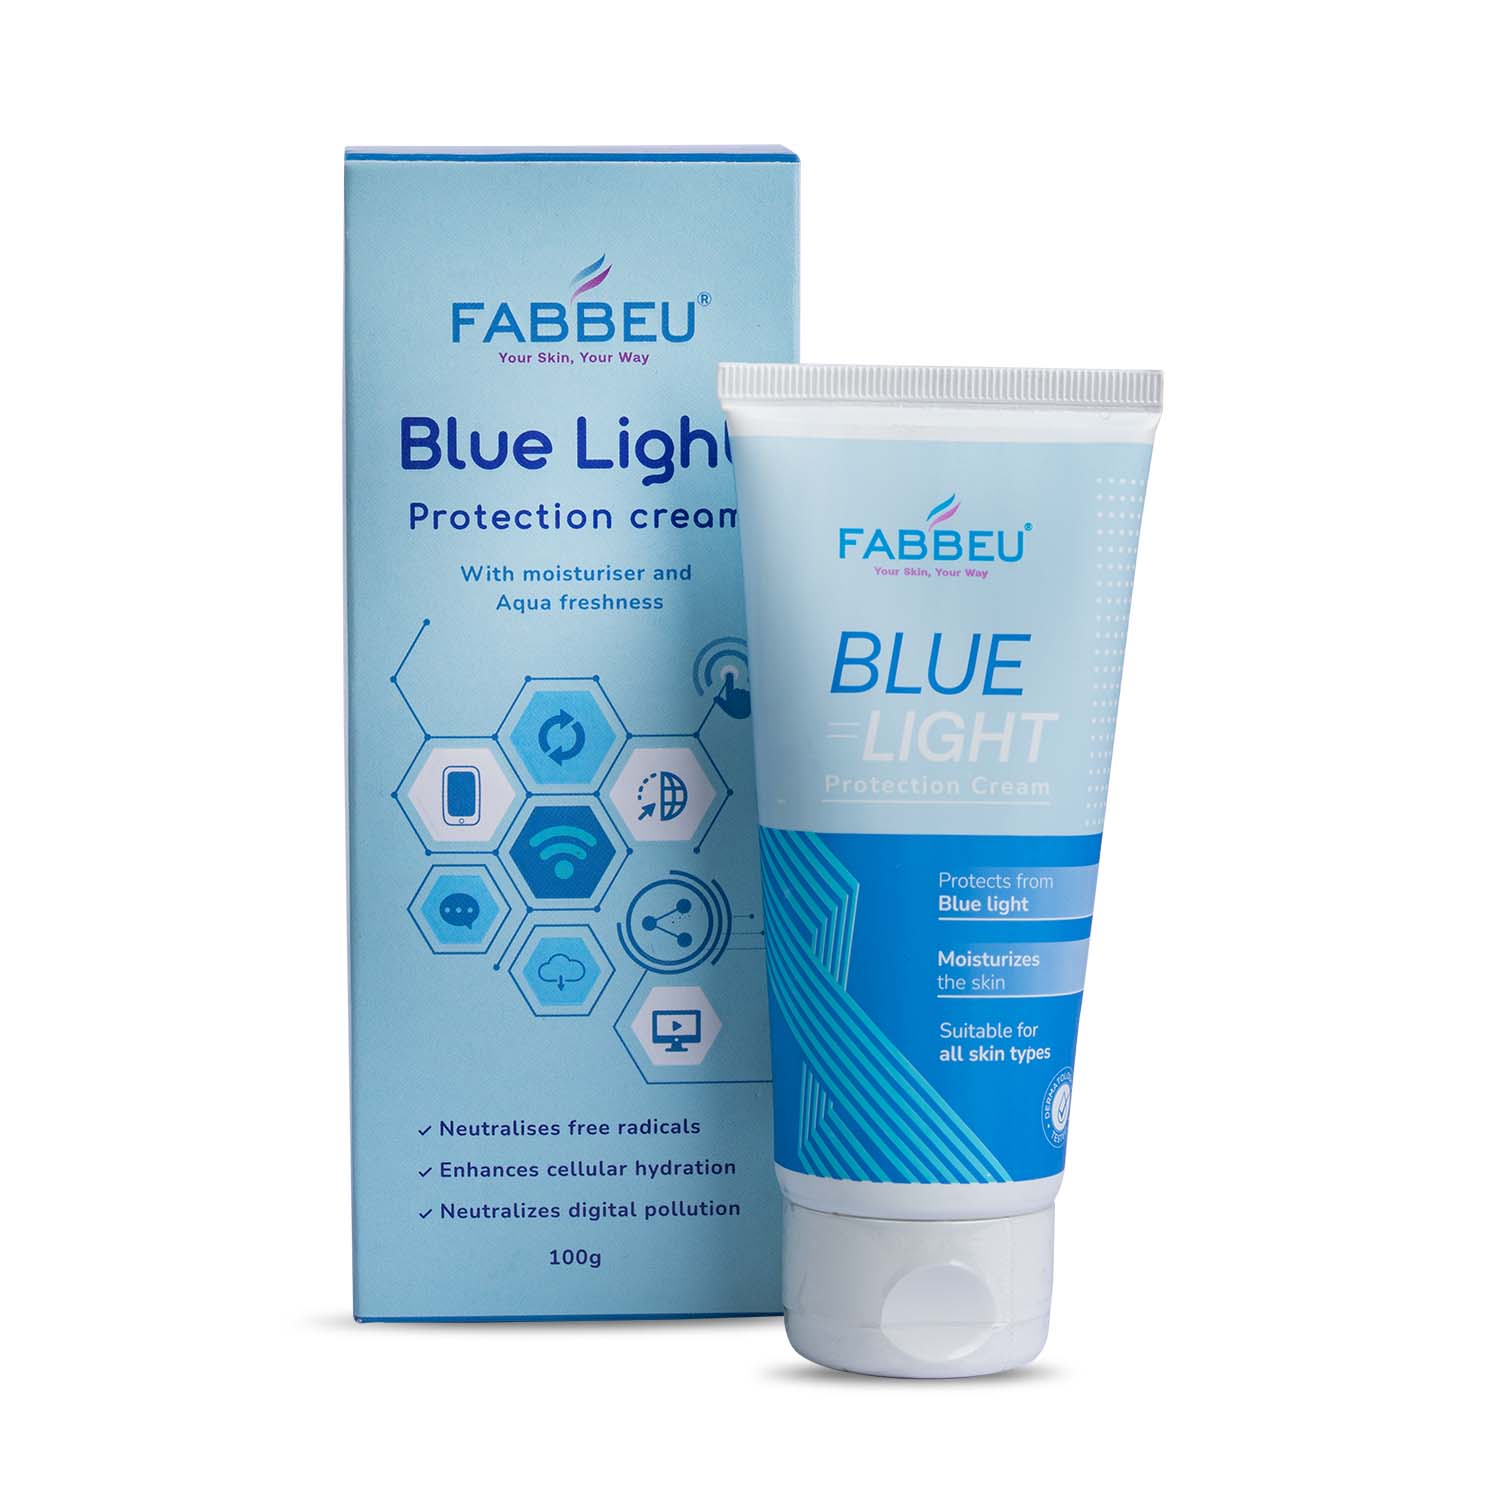 FABBEU Bluelight Protection Indoor Sunscreen with Moisturizer